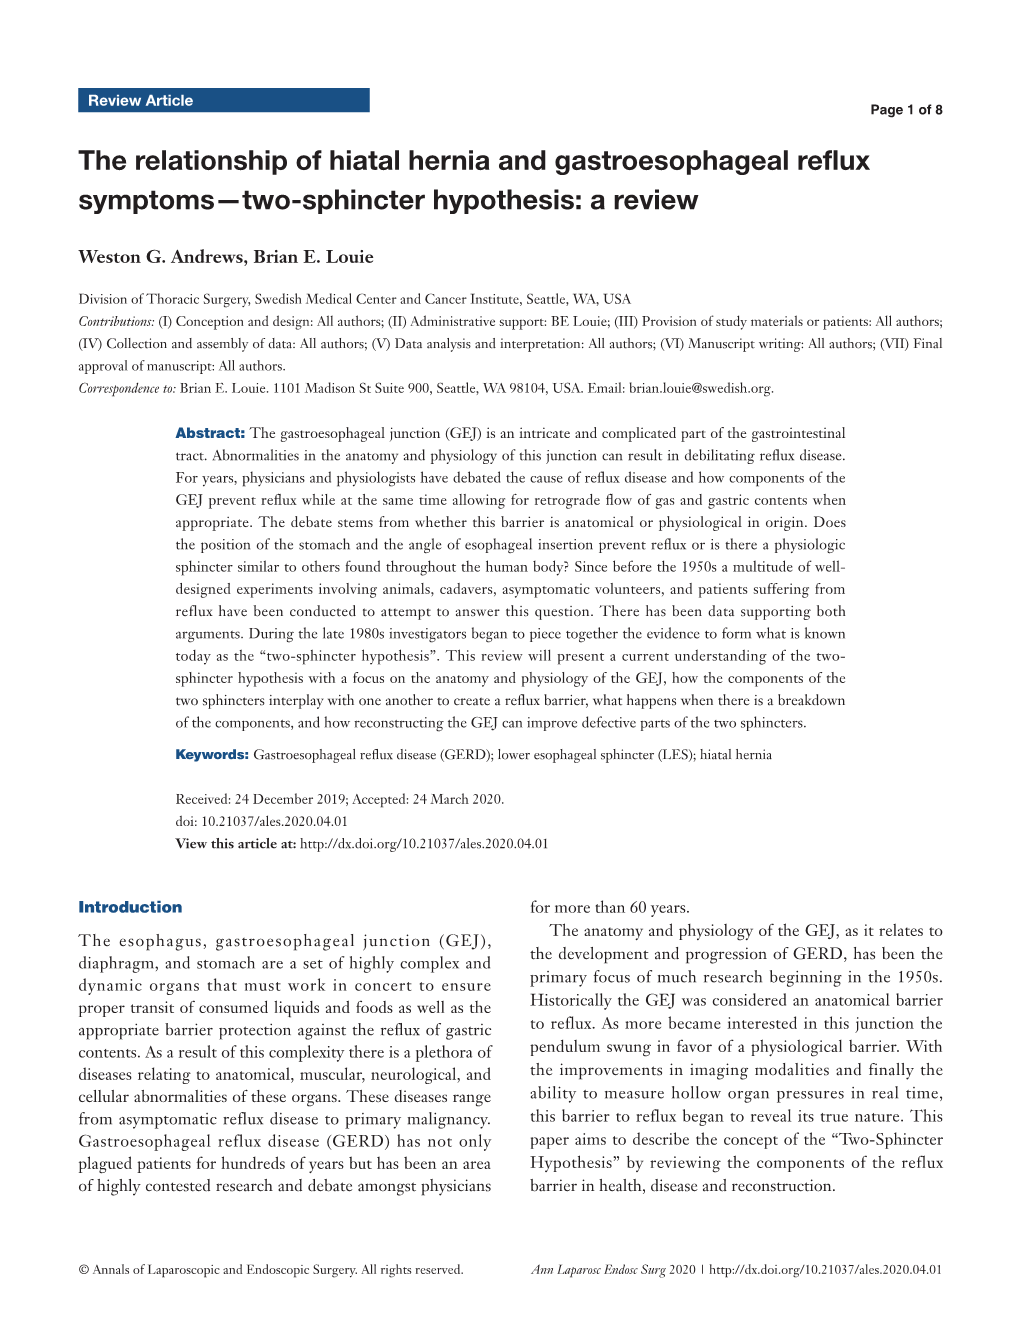 The Relationship of Hiatal Hernia and Gastroesophageal Reflux Symptoms—Two-Sphincter Hypothesis: a Review